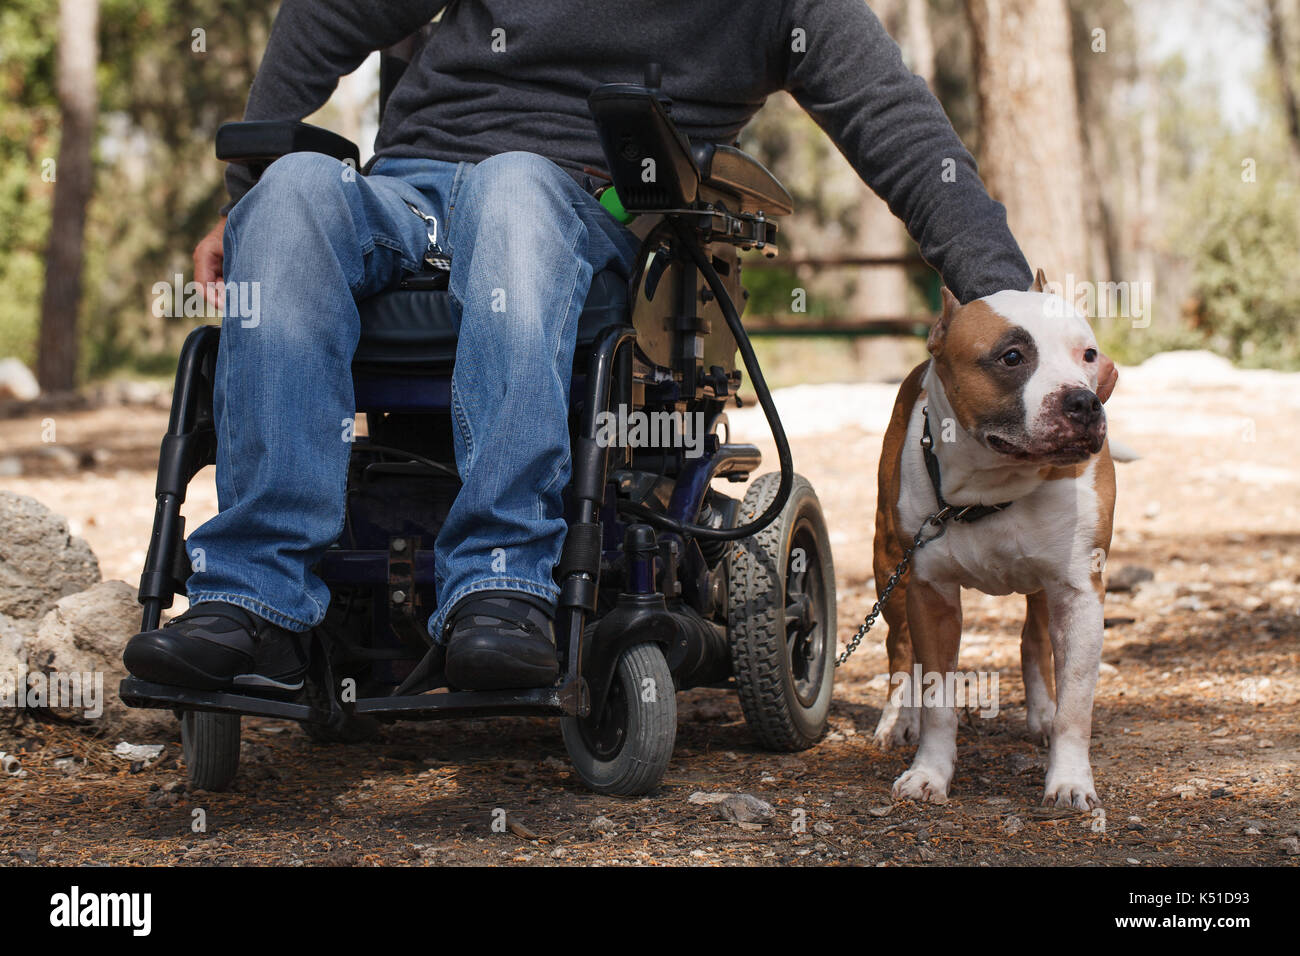 Disabled man in a wheelchair with his faithful dog Stock Photo